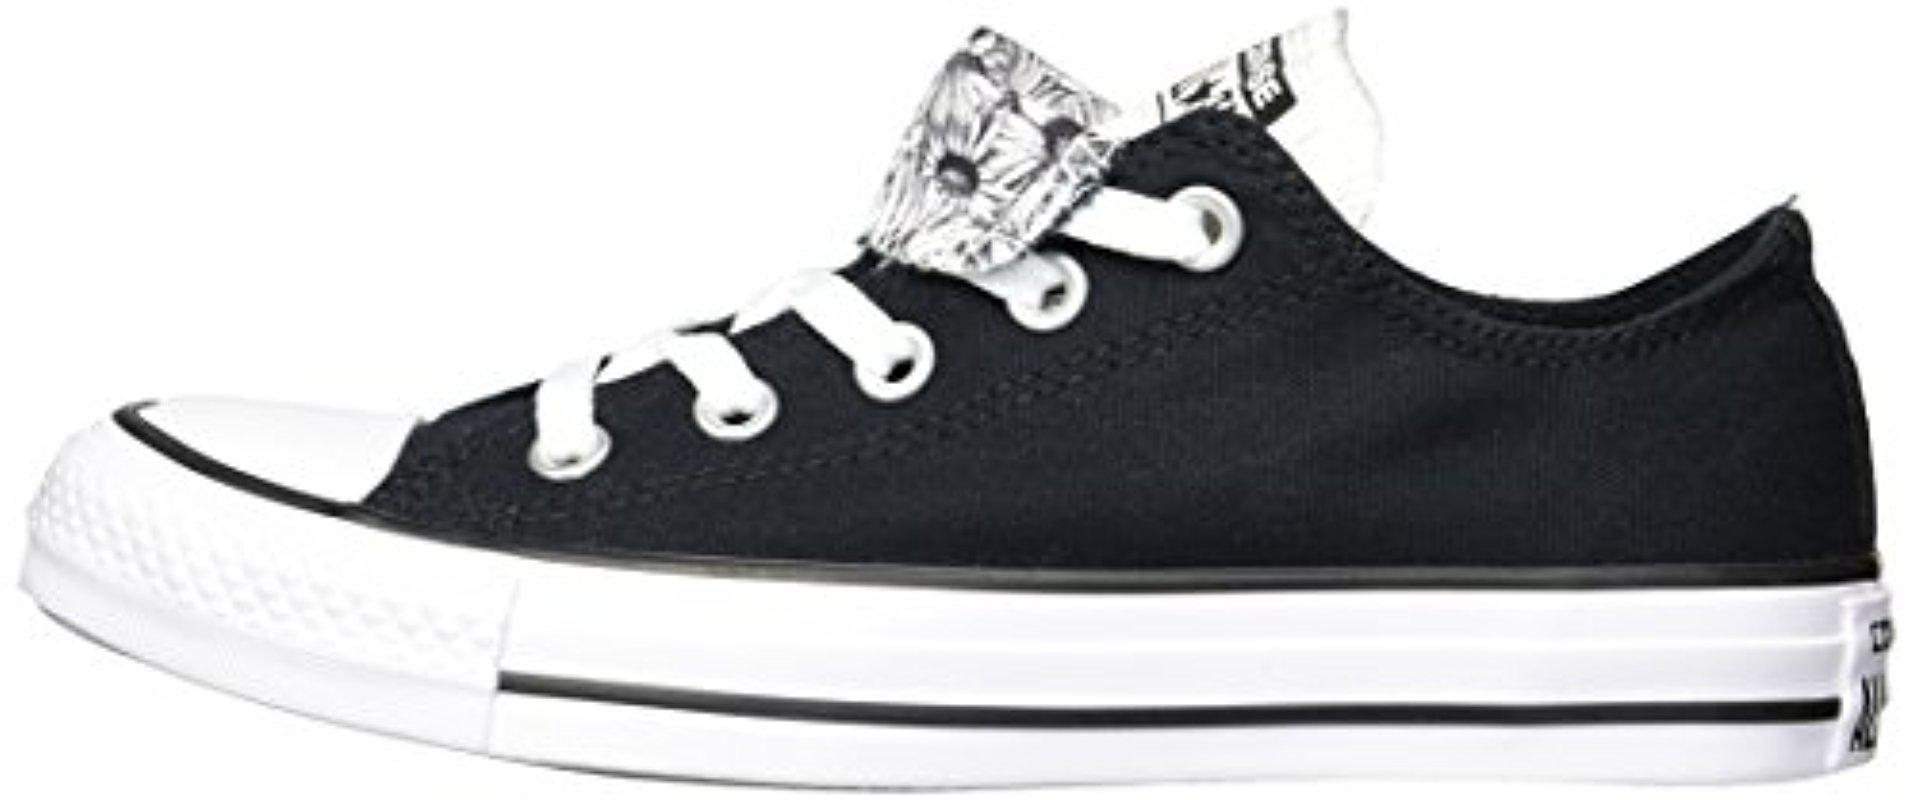 Converse Rubber Double Tongue Floral Low Top Sneaker in Black/White/Black  (Black) - Lyst